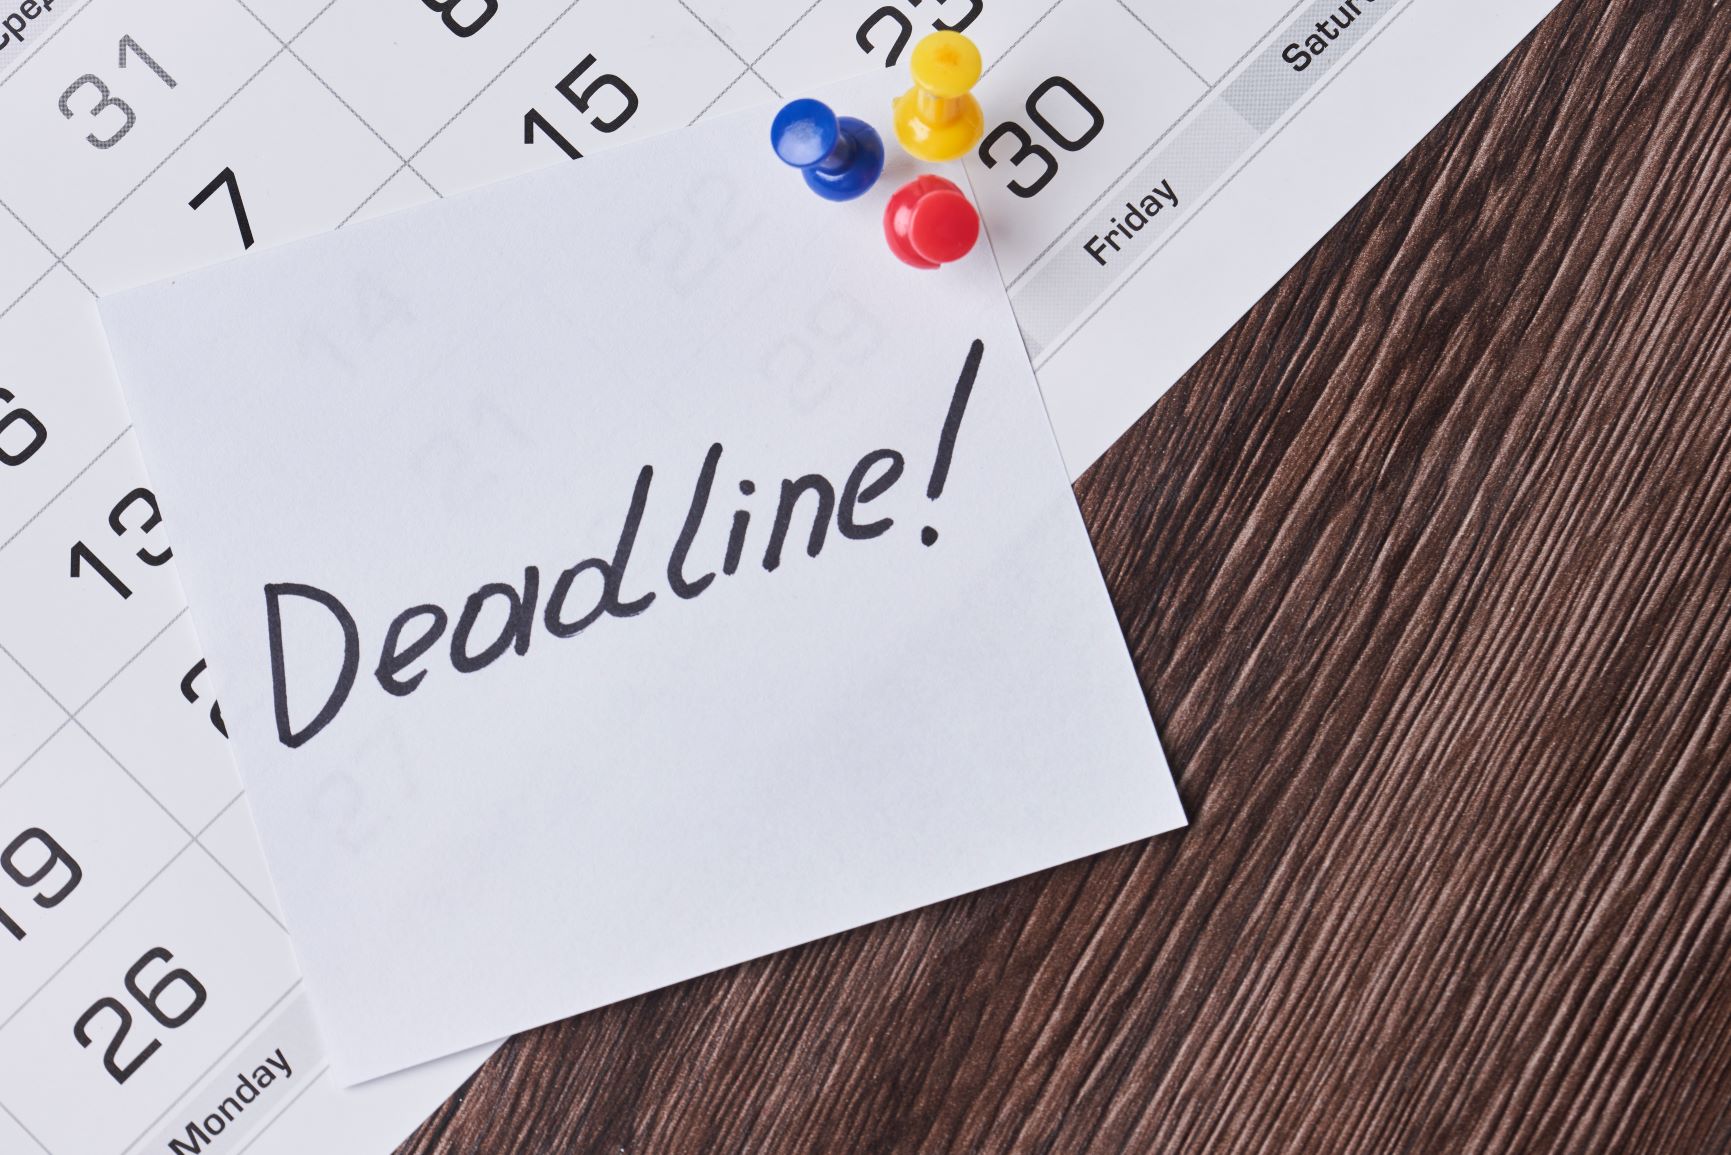 By EOD: The Ultimate Guide To Meeting Deadlines Today